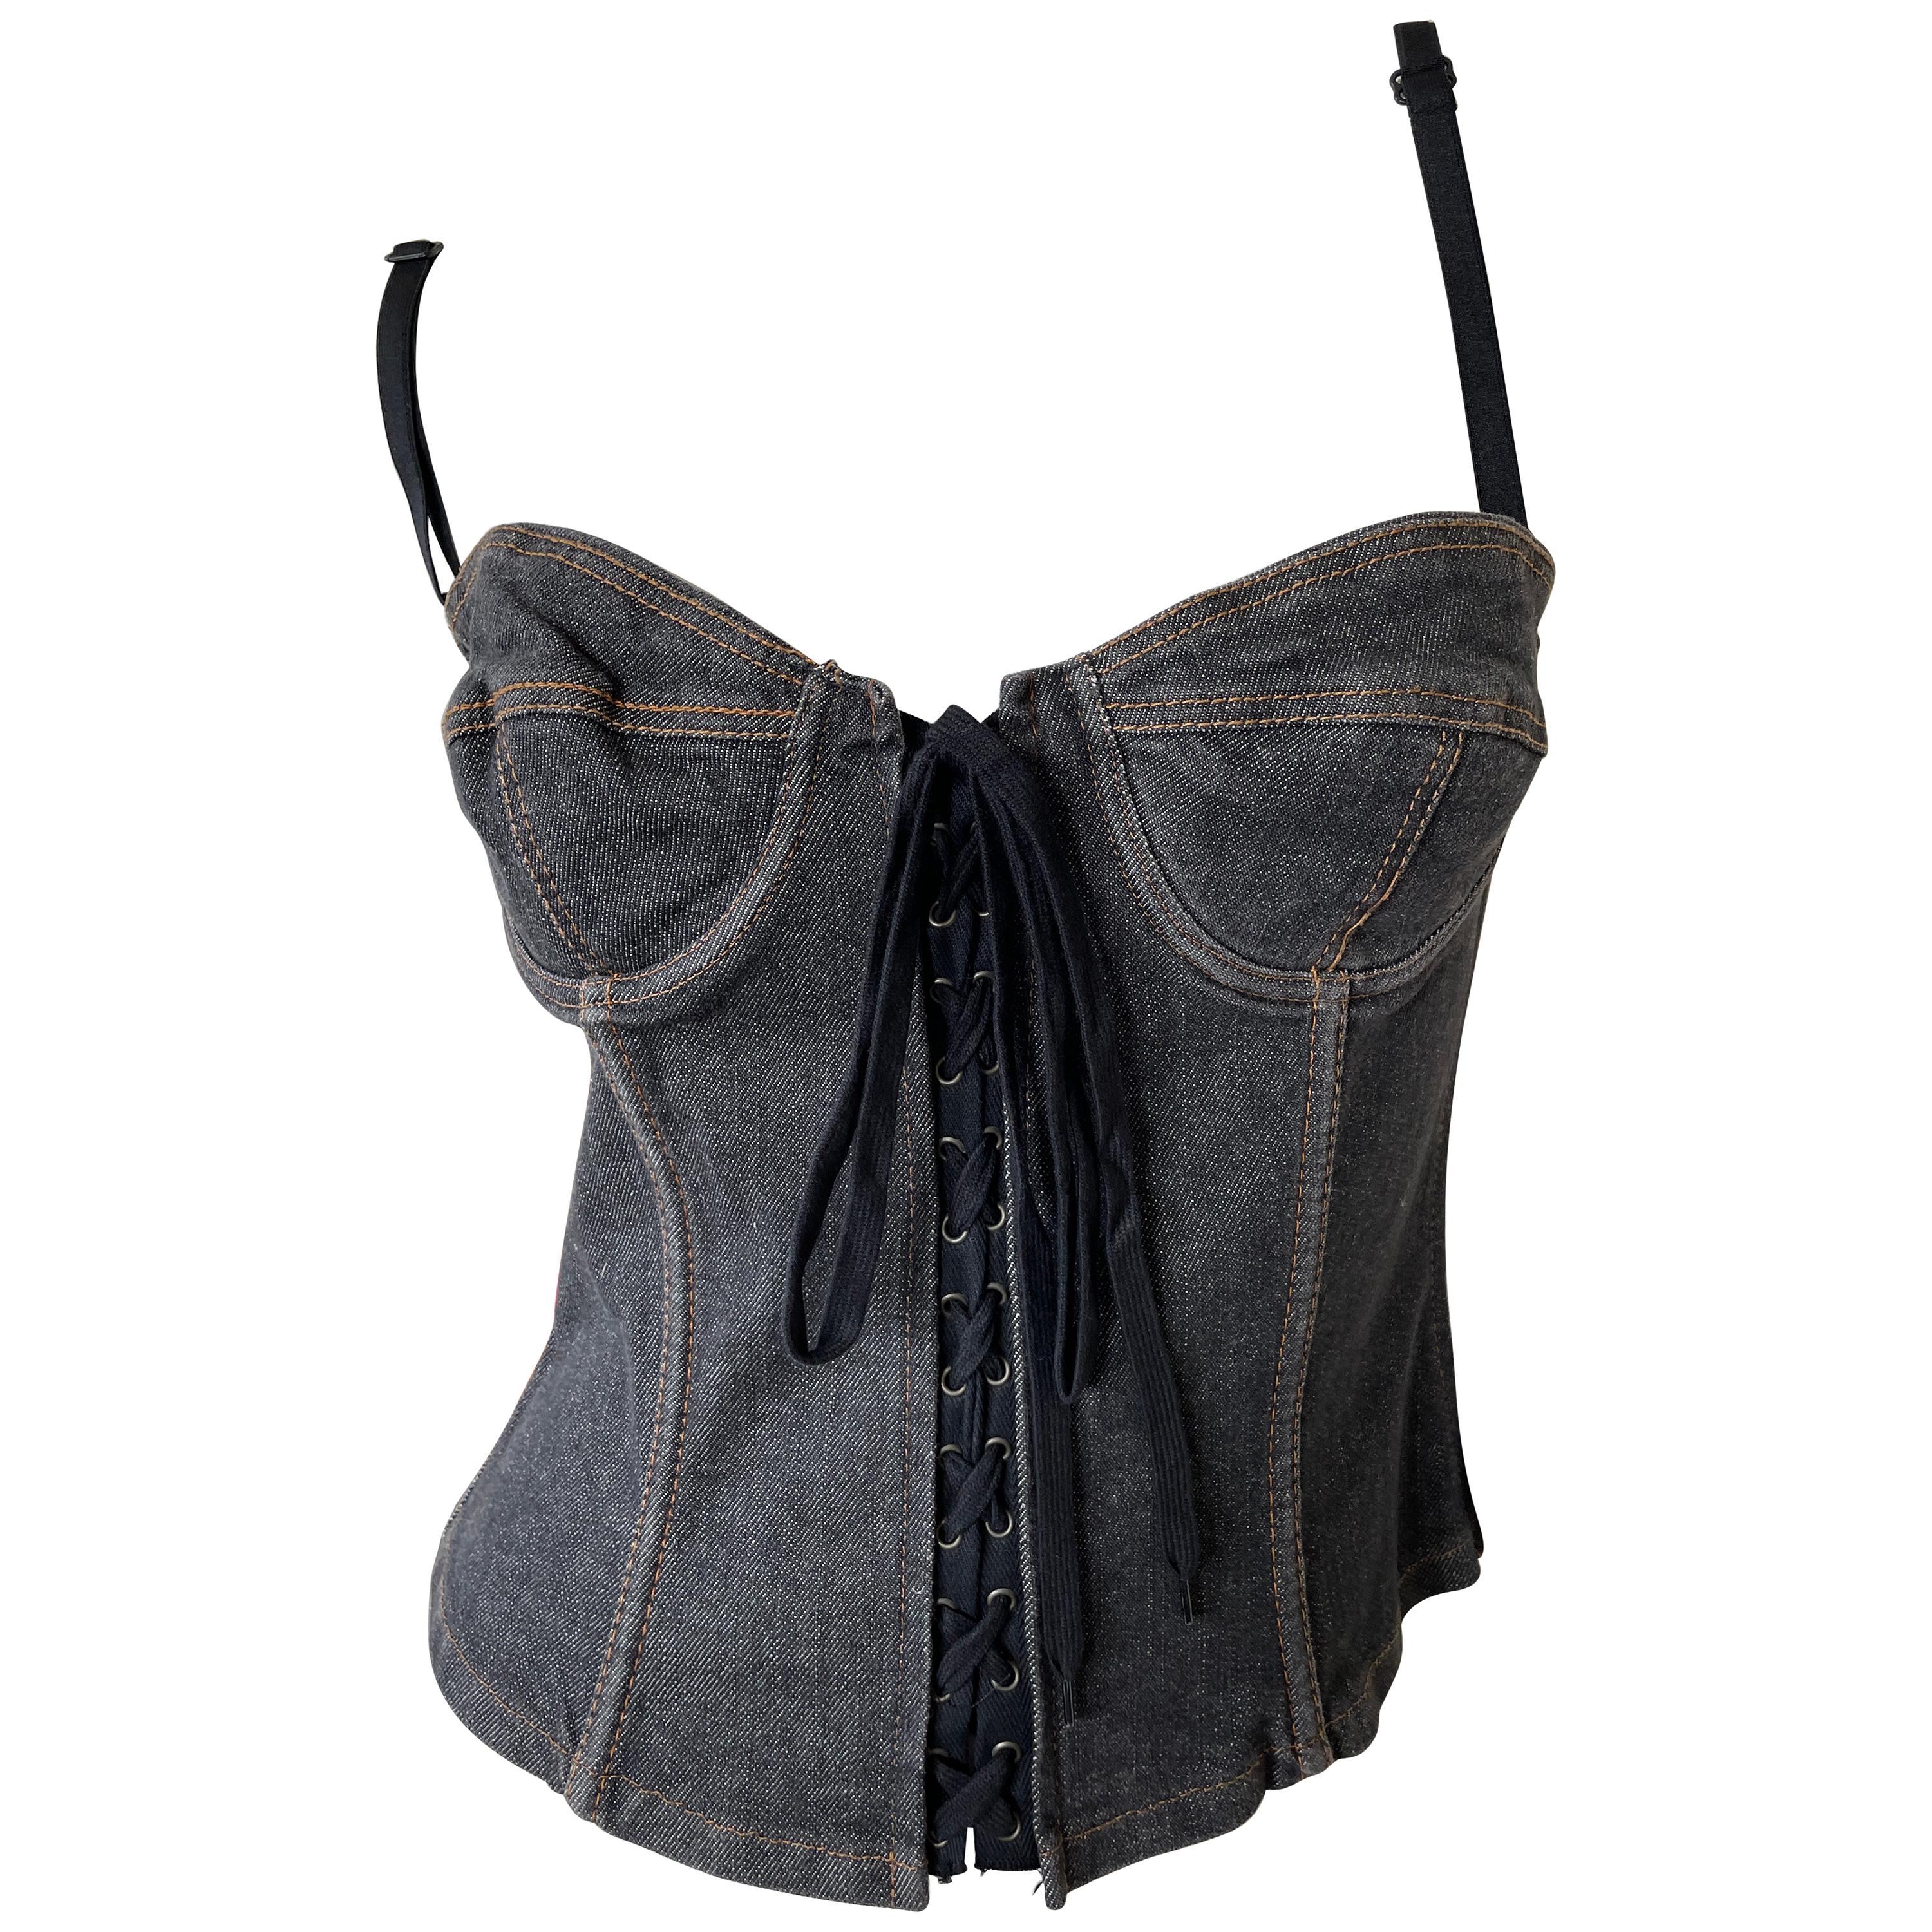 Dolce & Gabbana for D&G Sexy Gray Denim Corset with Lace Up Details. For Sale